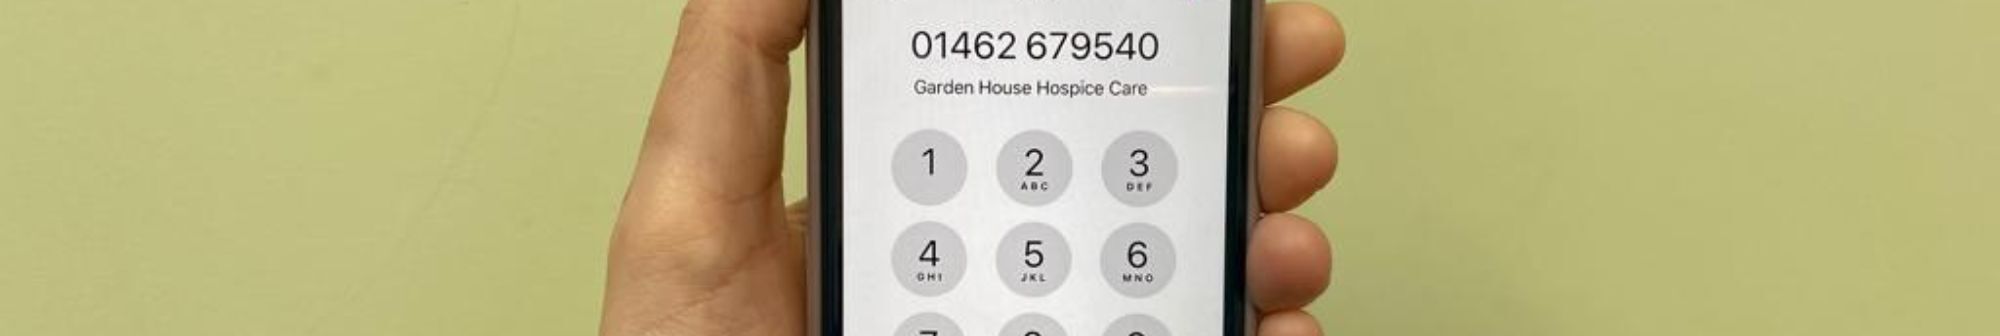 iphone-dial-screen-containing-the-hospice-phone-number